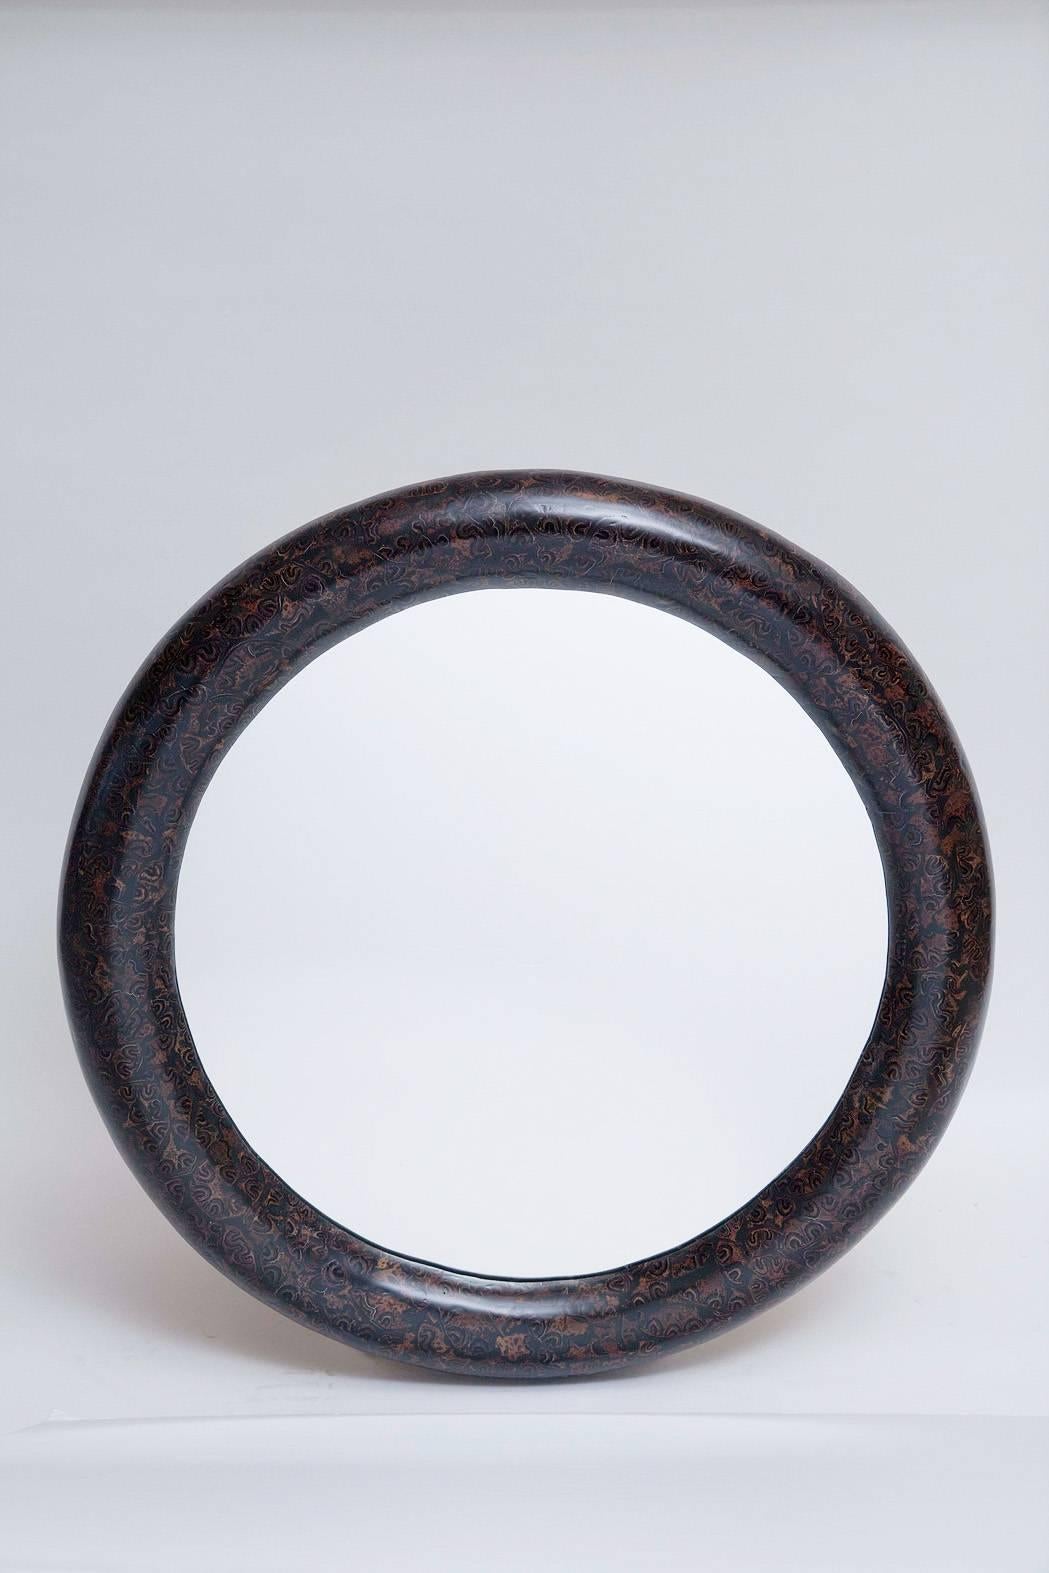 Rich black and brown bull-nosed mirror of resin and palm root inlay by Enrique Garces, Colombia circa 1980. Professionally restored.